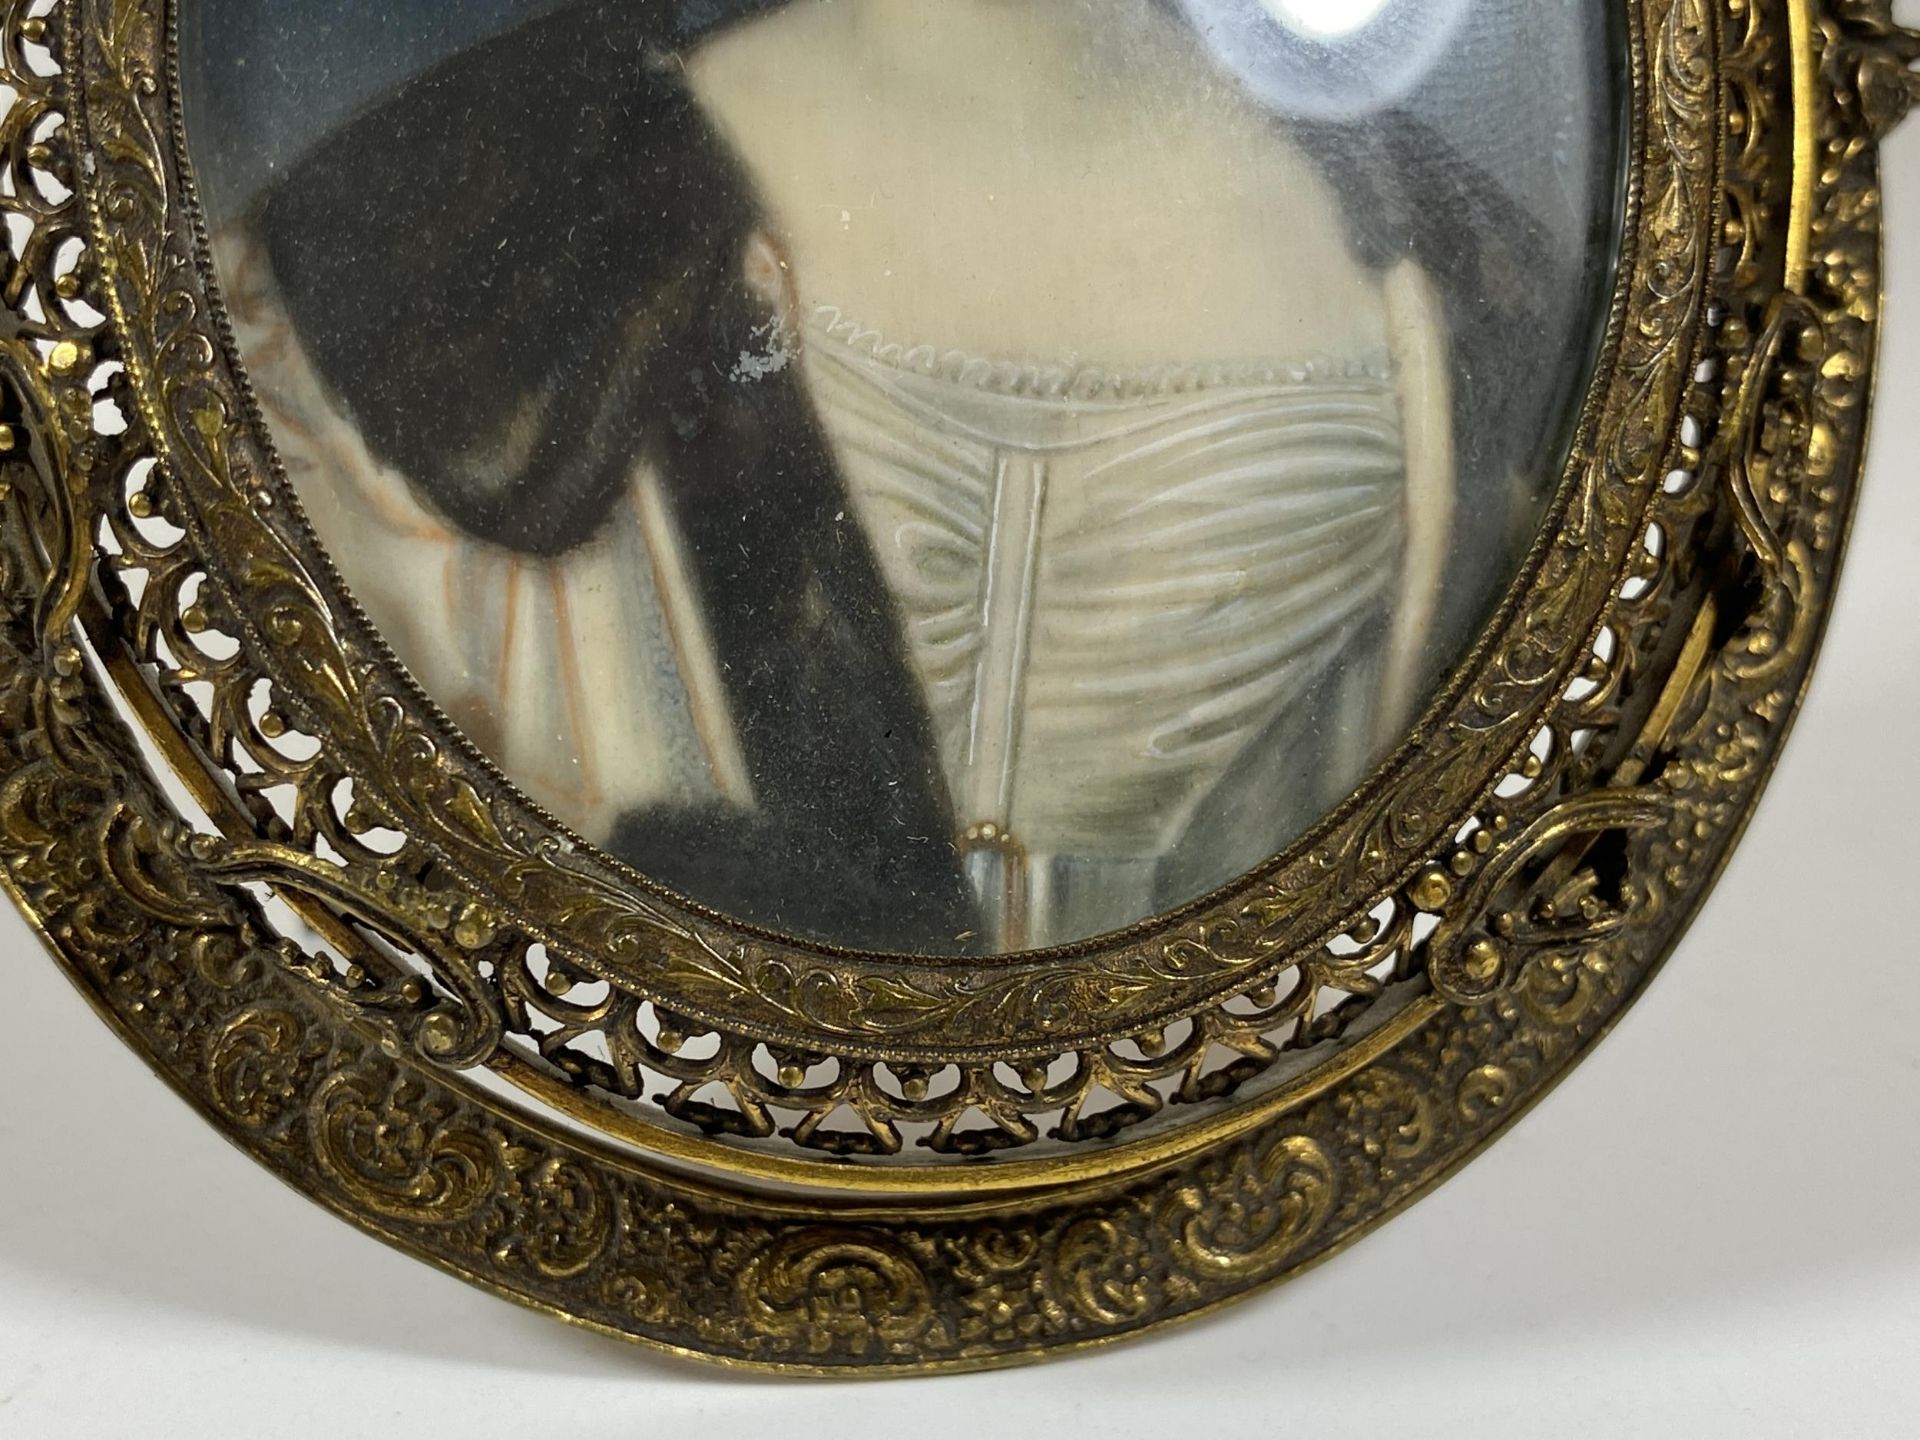 AN EARLY 19TH CENTURY HAND PAINTED PORTRAIT OF A LADY, SIGNED M.STIELER, IN ORNATE BRASS OVAL - Image 4 of 12